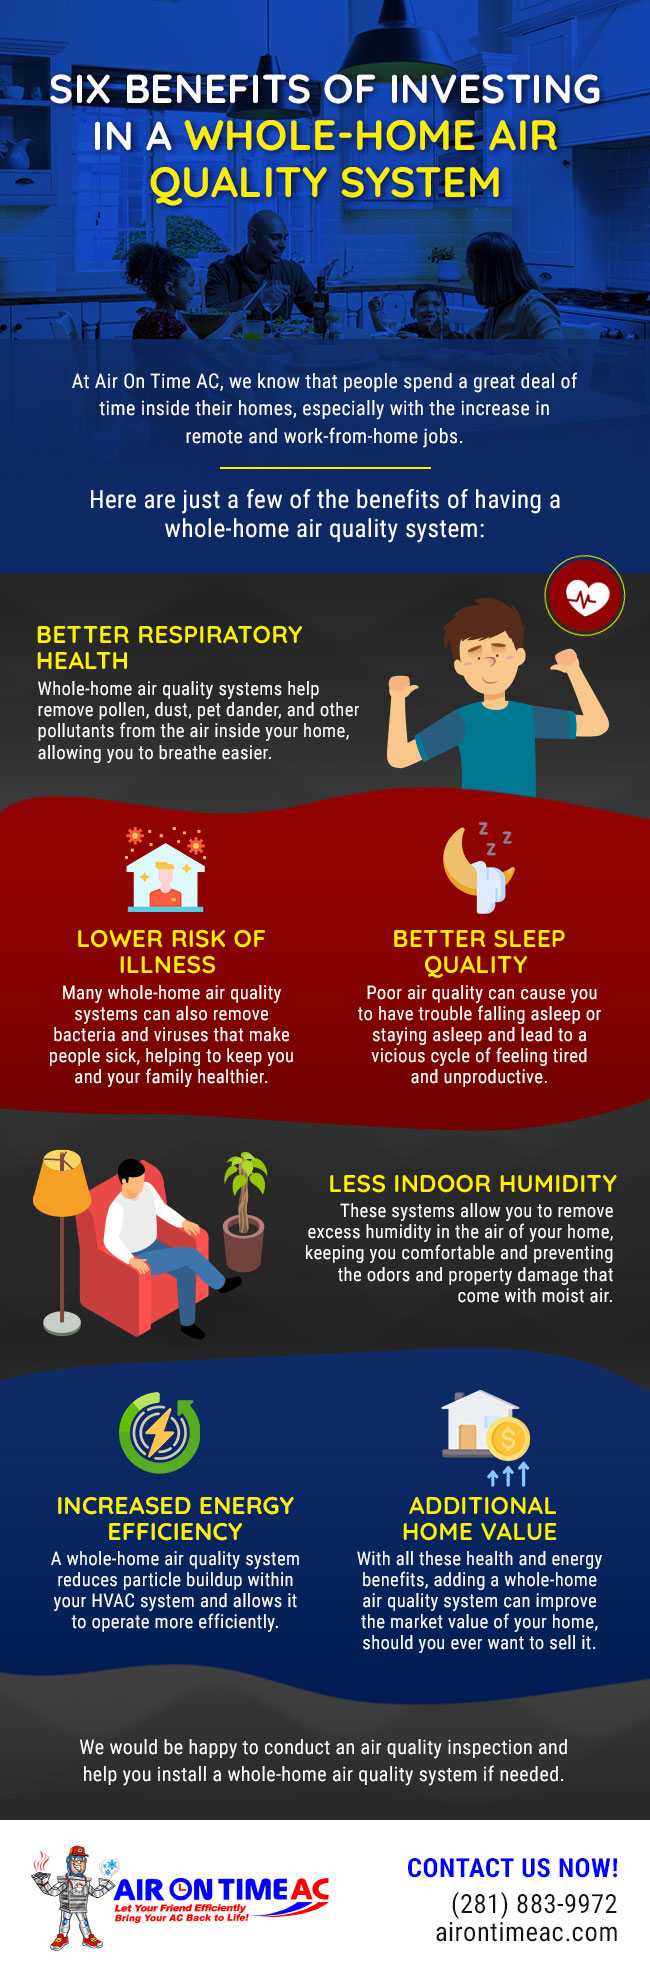 Six Benefits of Investing in a Whole-Home Air Quality System [infographic]